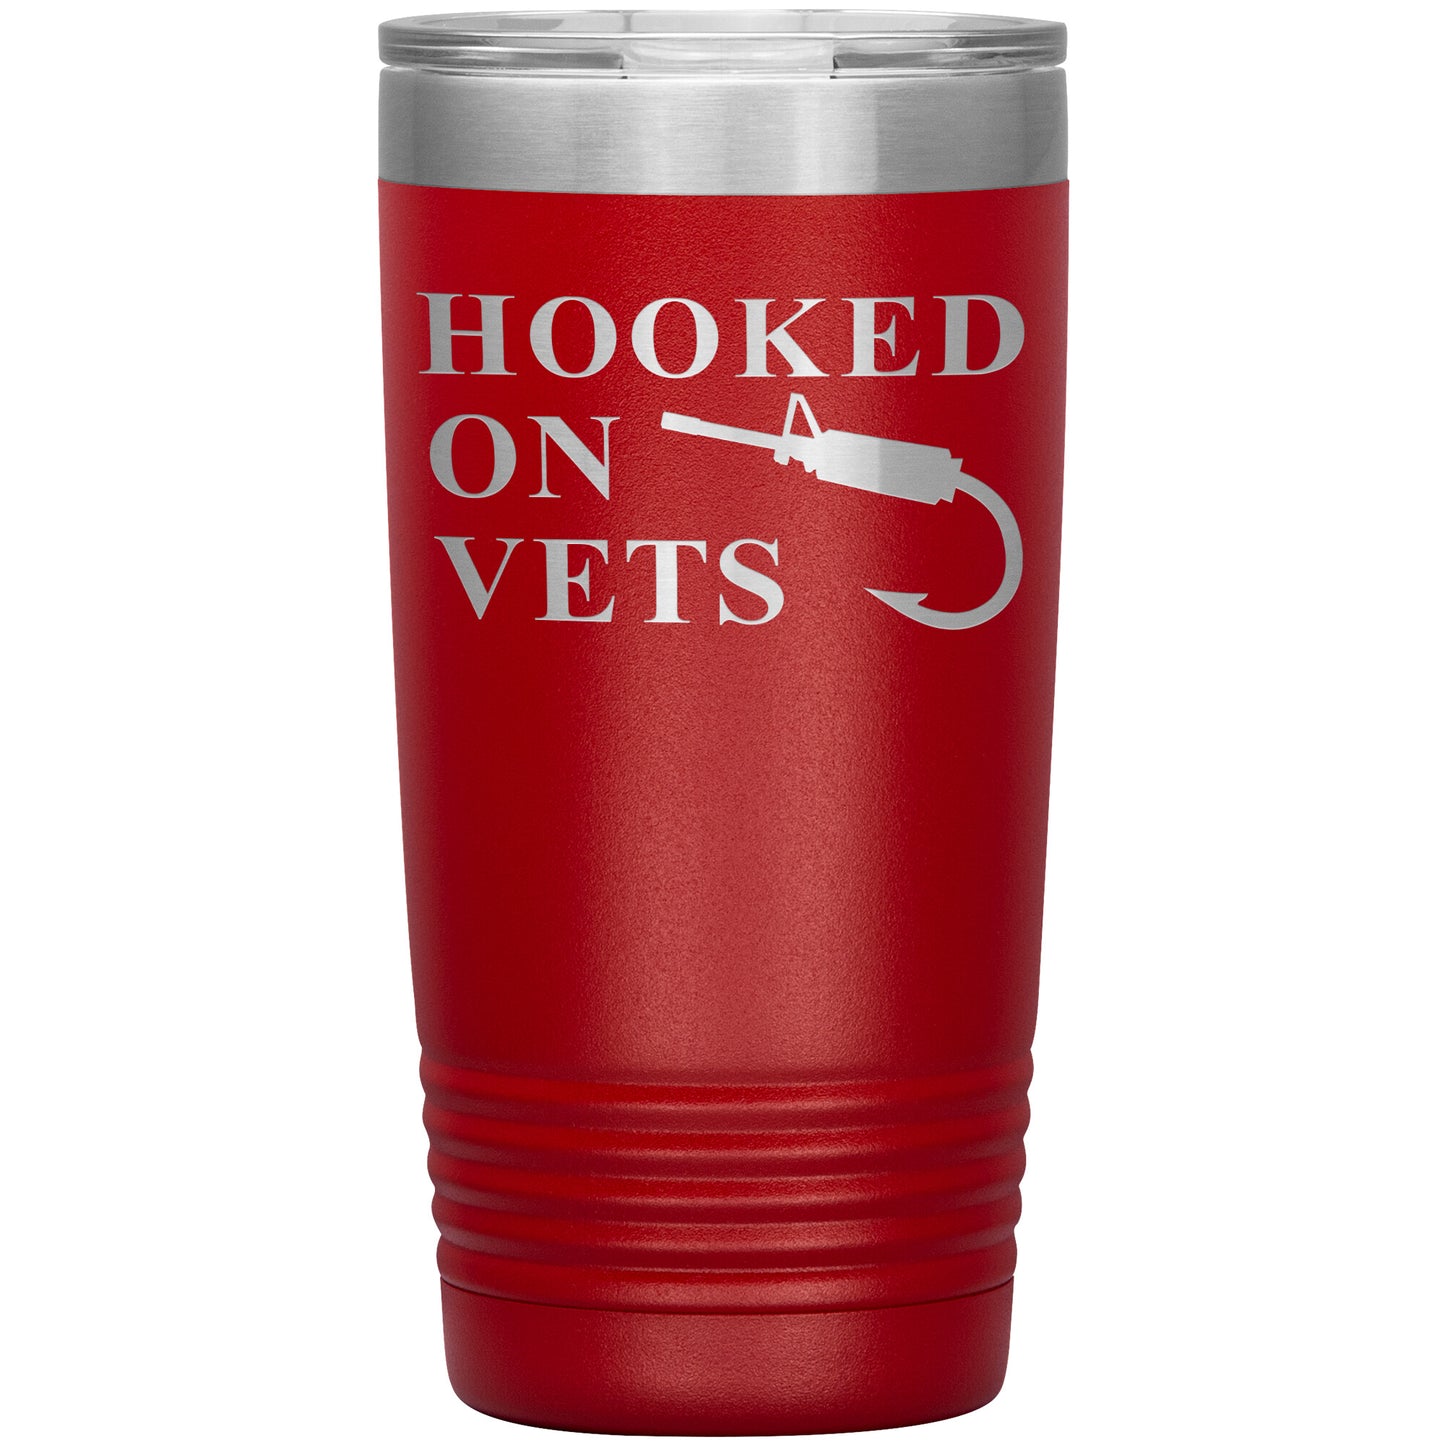 HOOKED ON VETS - 20oz Insulated Tumbler